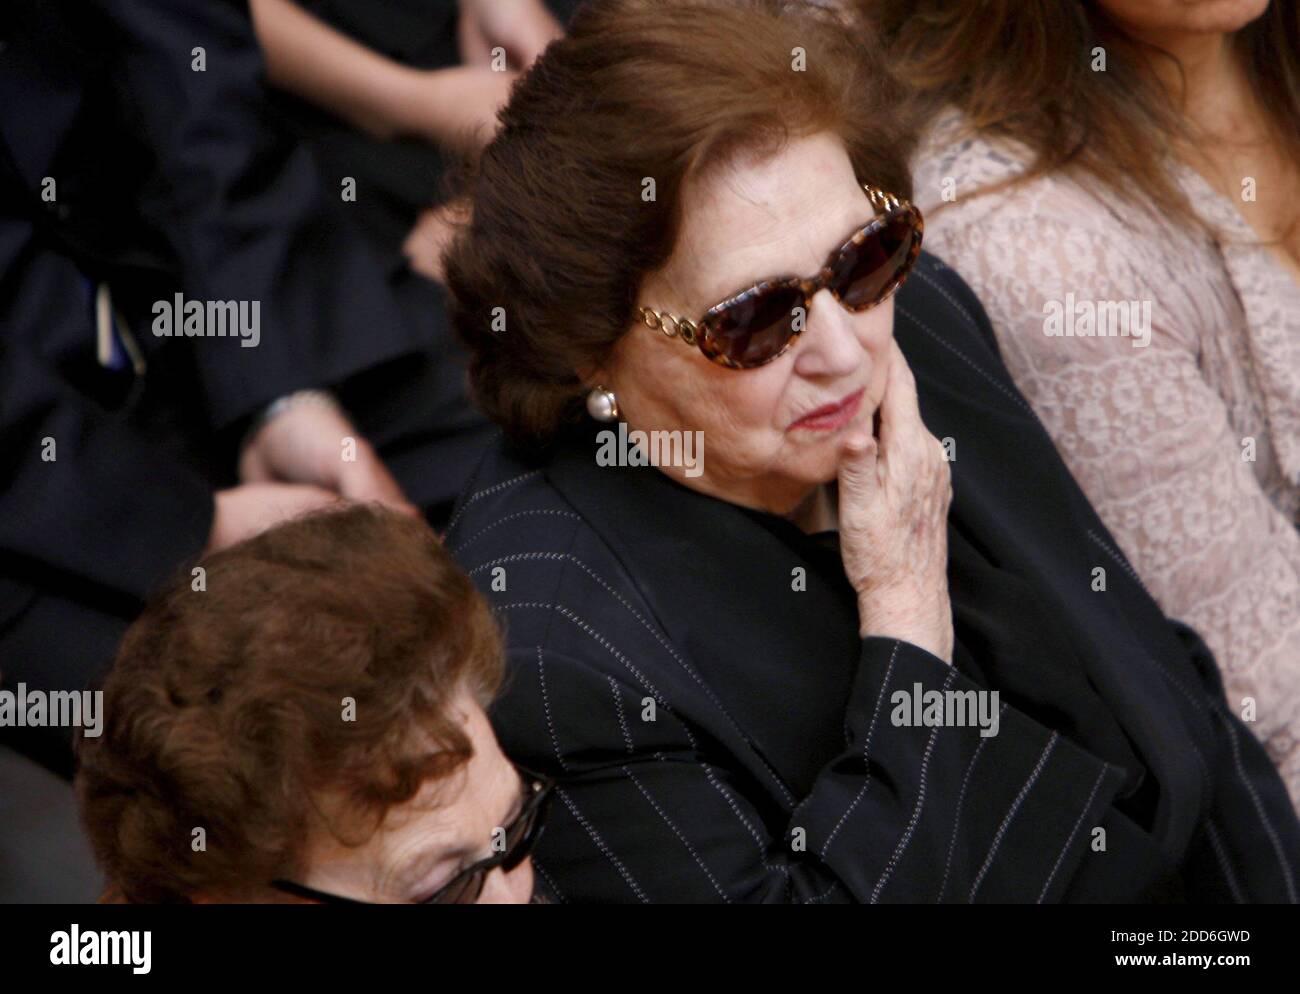 NO FILM, NO VIDEO, NO TV, NO DOCUMENTARY - The widow of Augusto Pinochet, Lucia Hiriart de Pinochet, attend a wake for the former Chilean leader in Santiago, Chile, on December 11, 2006. Photo by Carlos Vera Mancilla/MCT/ABACAPRESS.COM Stock Photo